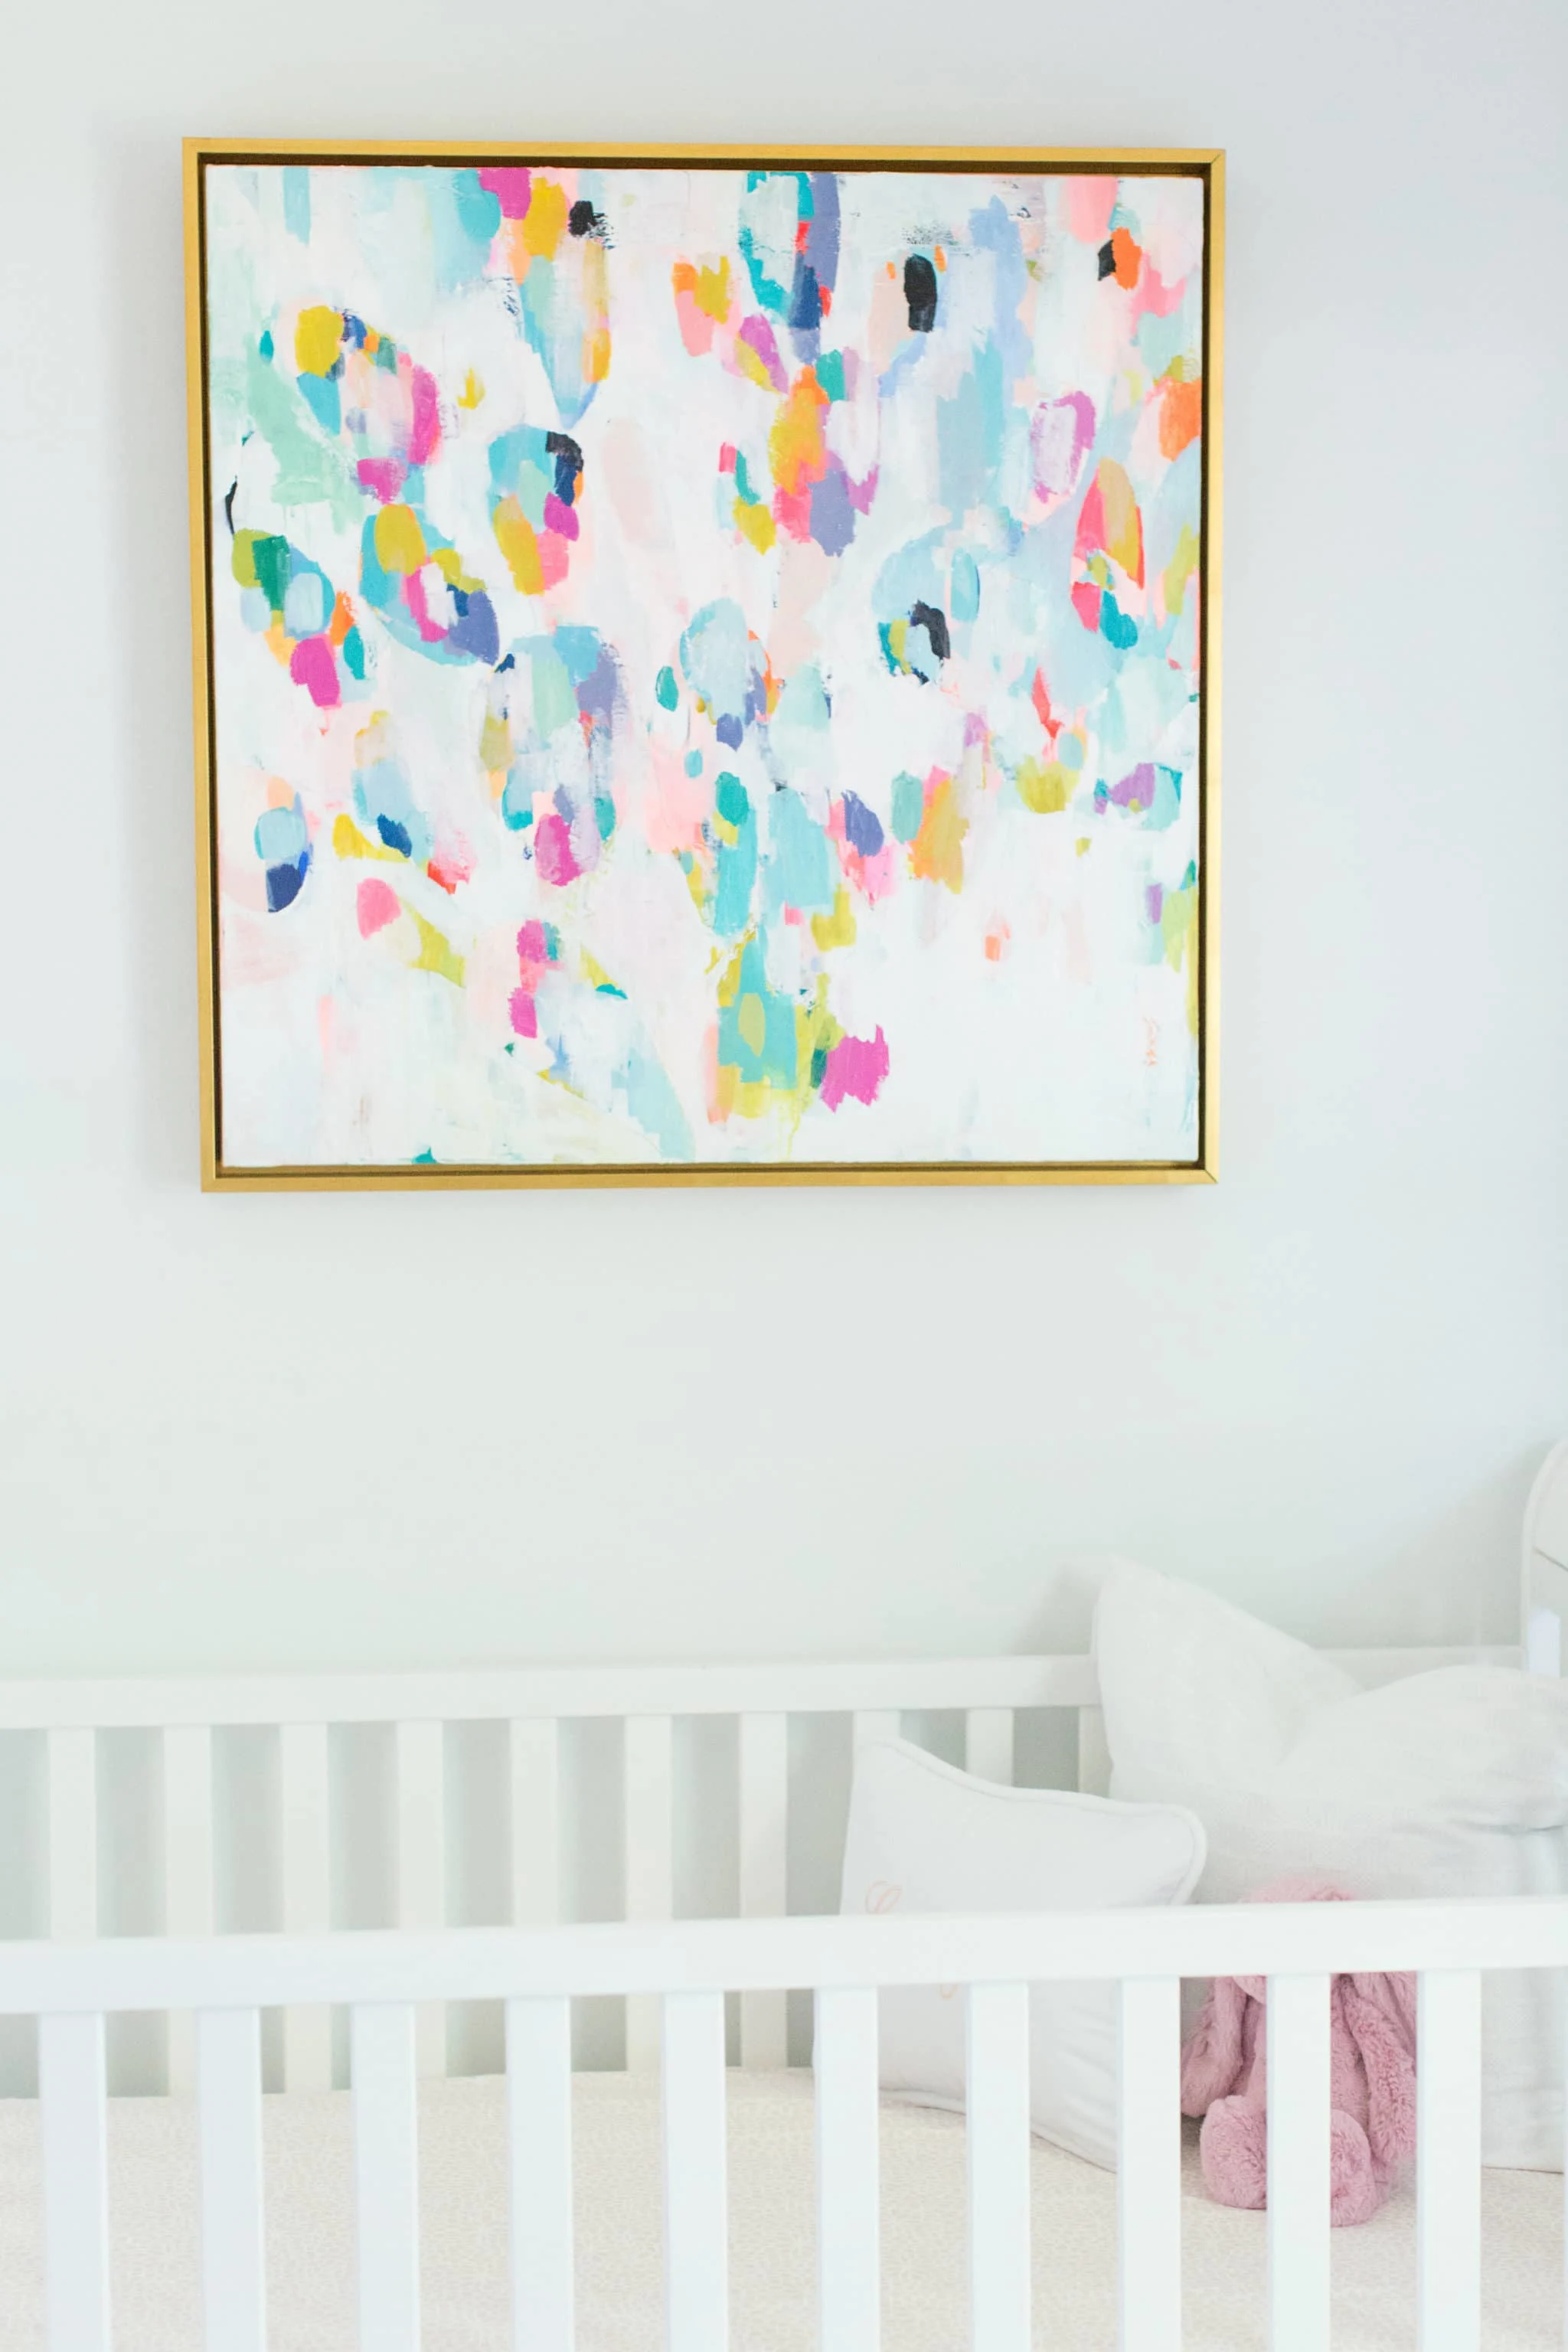 Abstract Painting in Nursery - Project Nursery